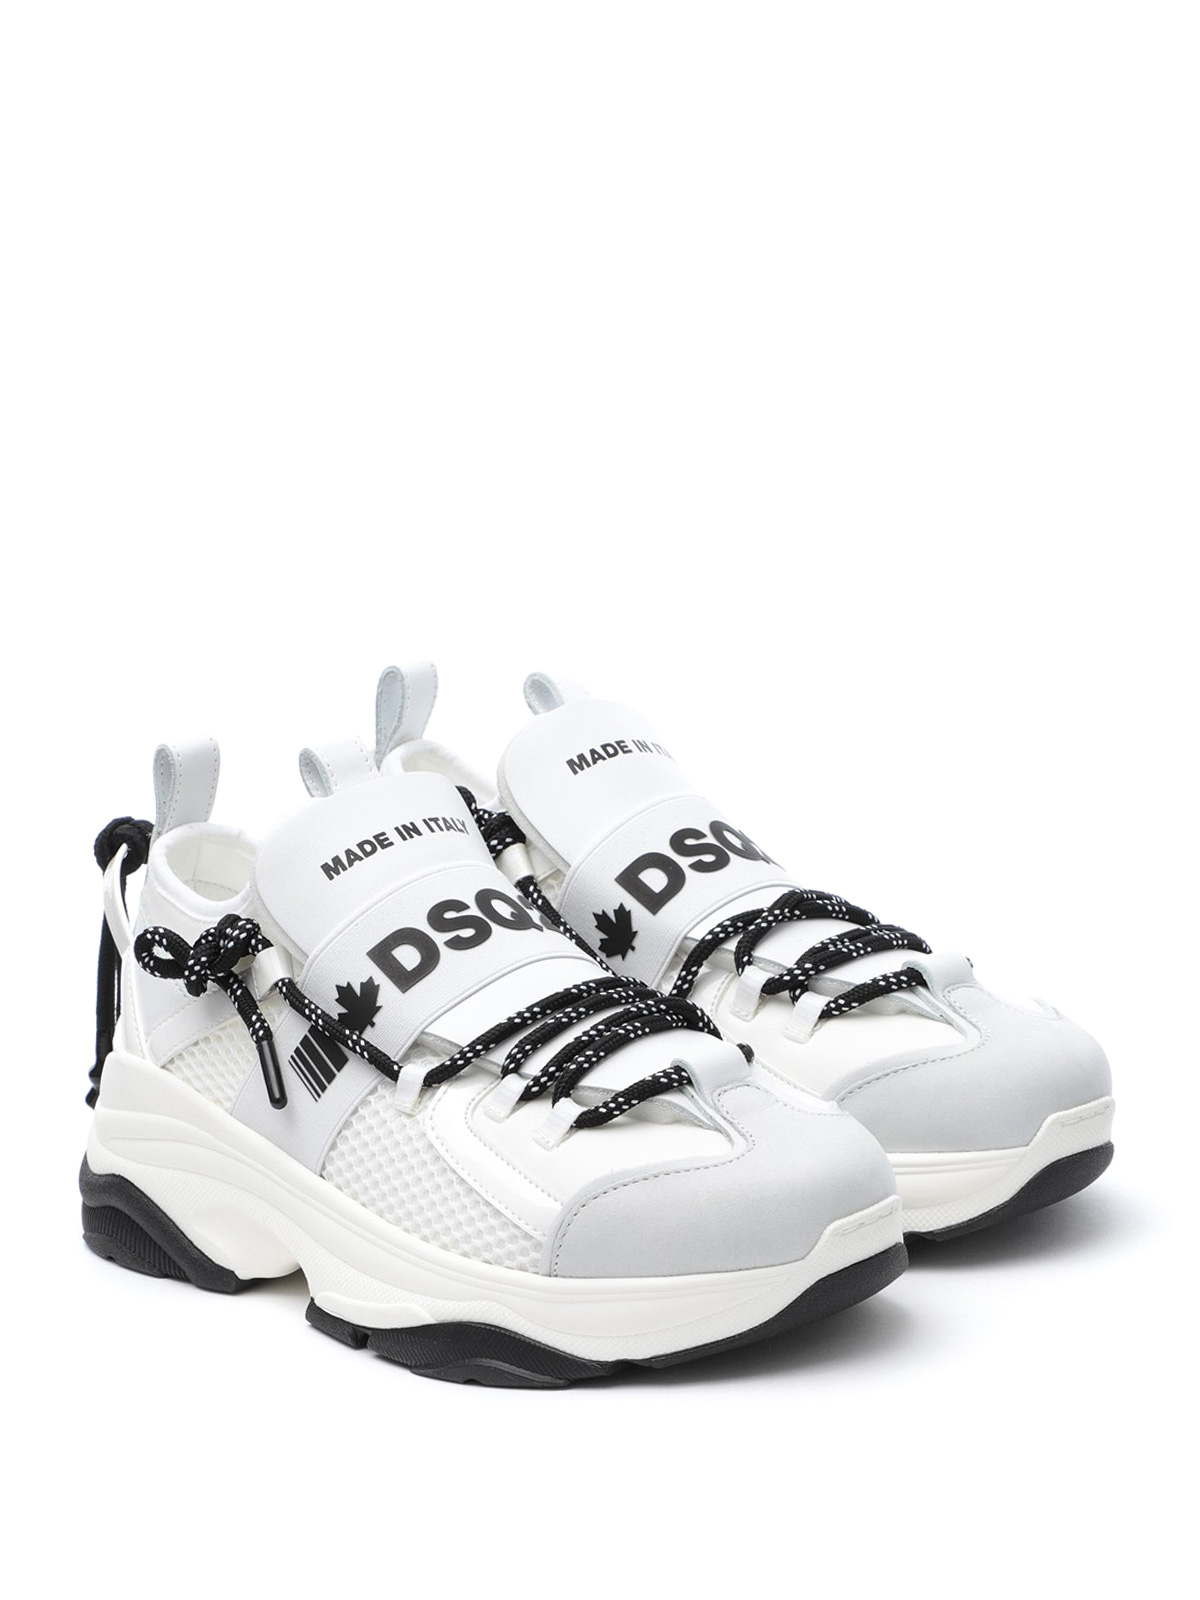 Dsquared2 - D-Bumpy One white sneakers 